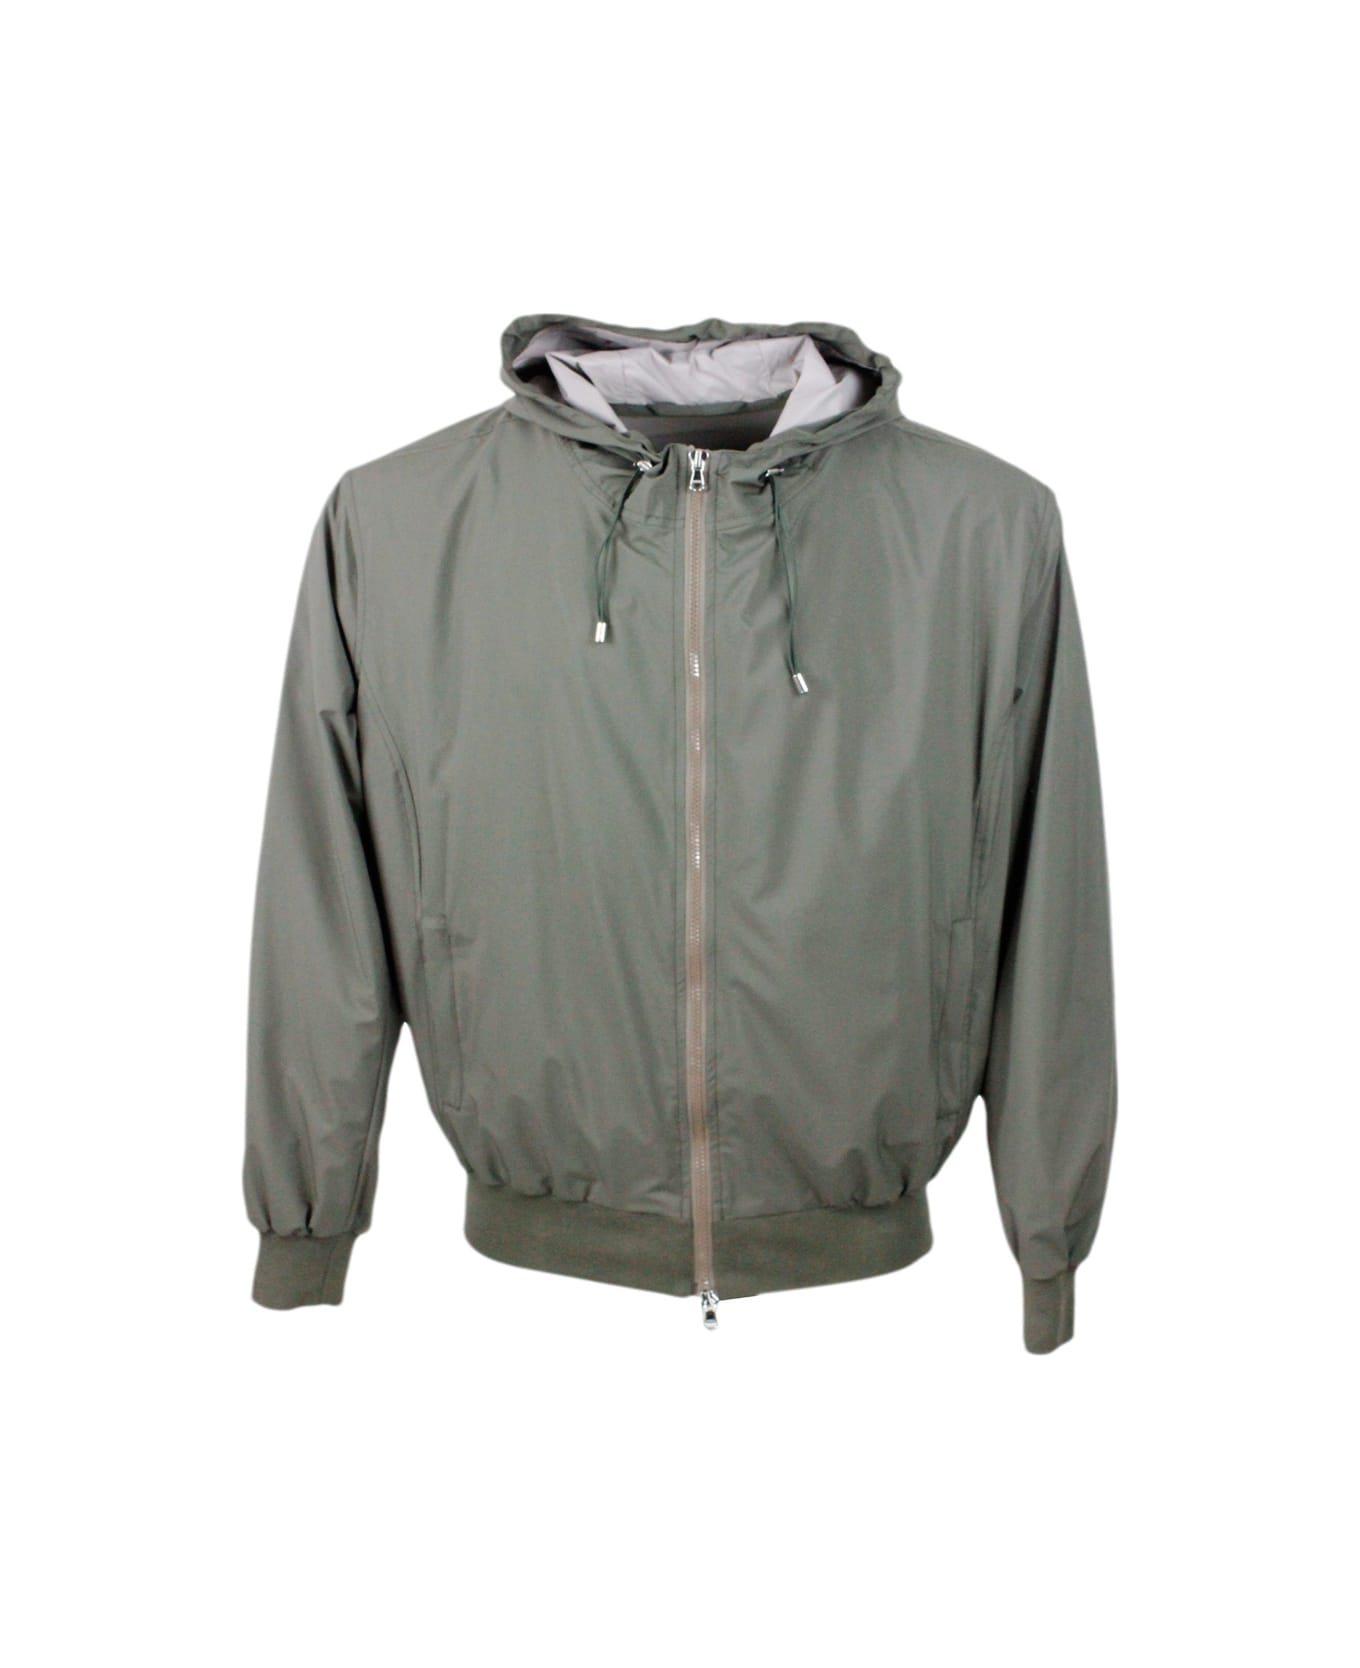 Barba Napoli Lightweight Bomber Jacket In Windproof Technical Fabric With Hood With Zip Closure And Knitted Cuffs And Bottom. - Green